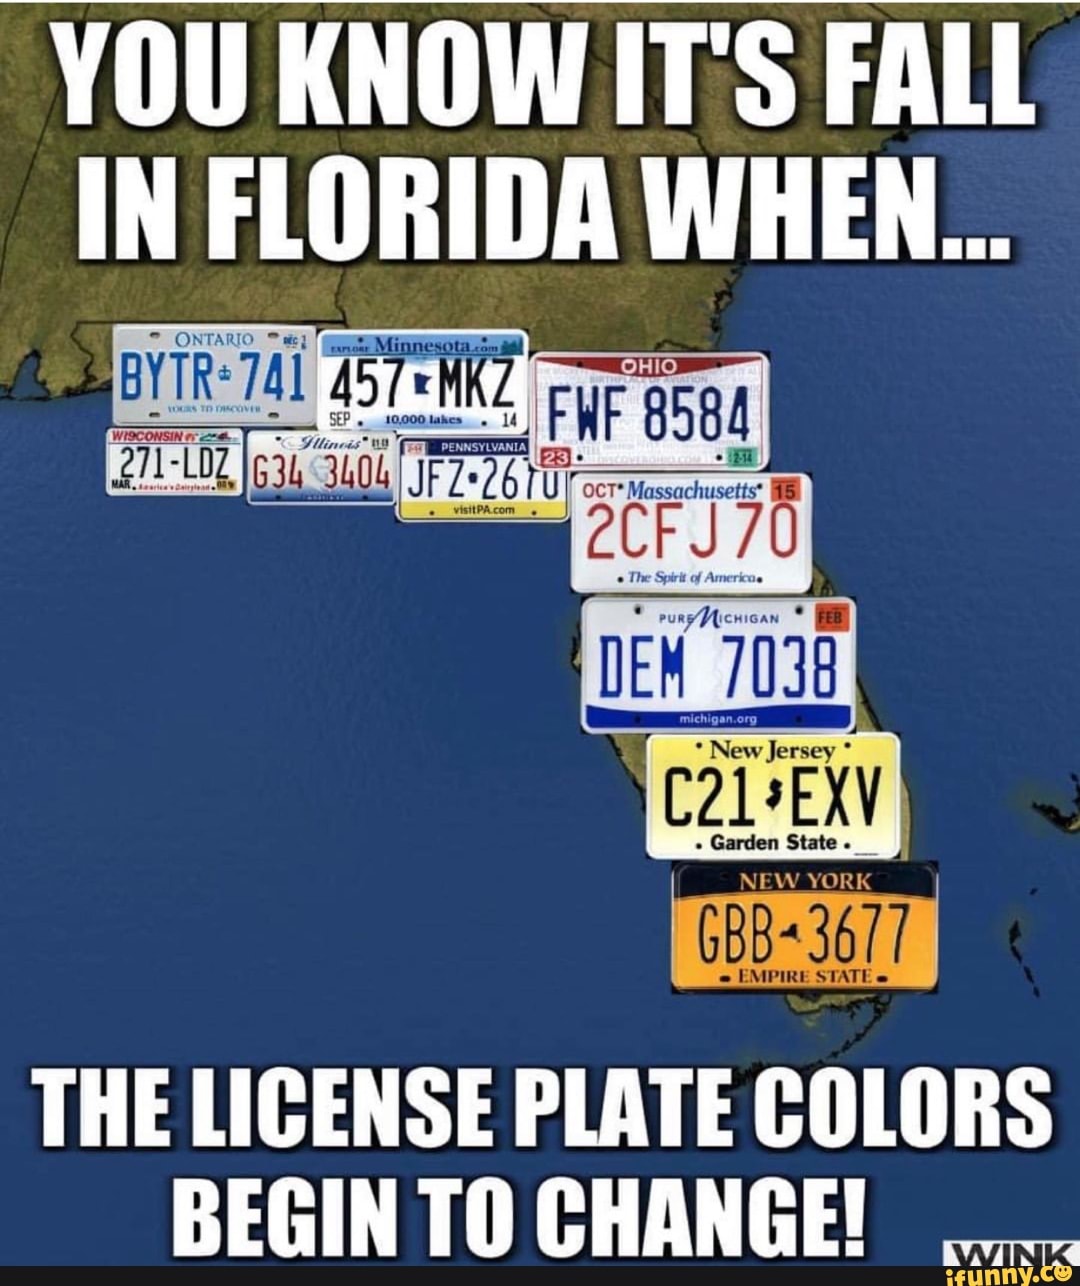 YOU KNOW ITS FALL IN FLORIDA WHEN... THE LICENSE PLATE COLORS BEGIN TO